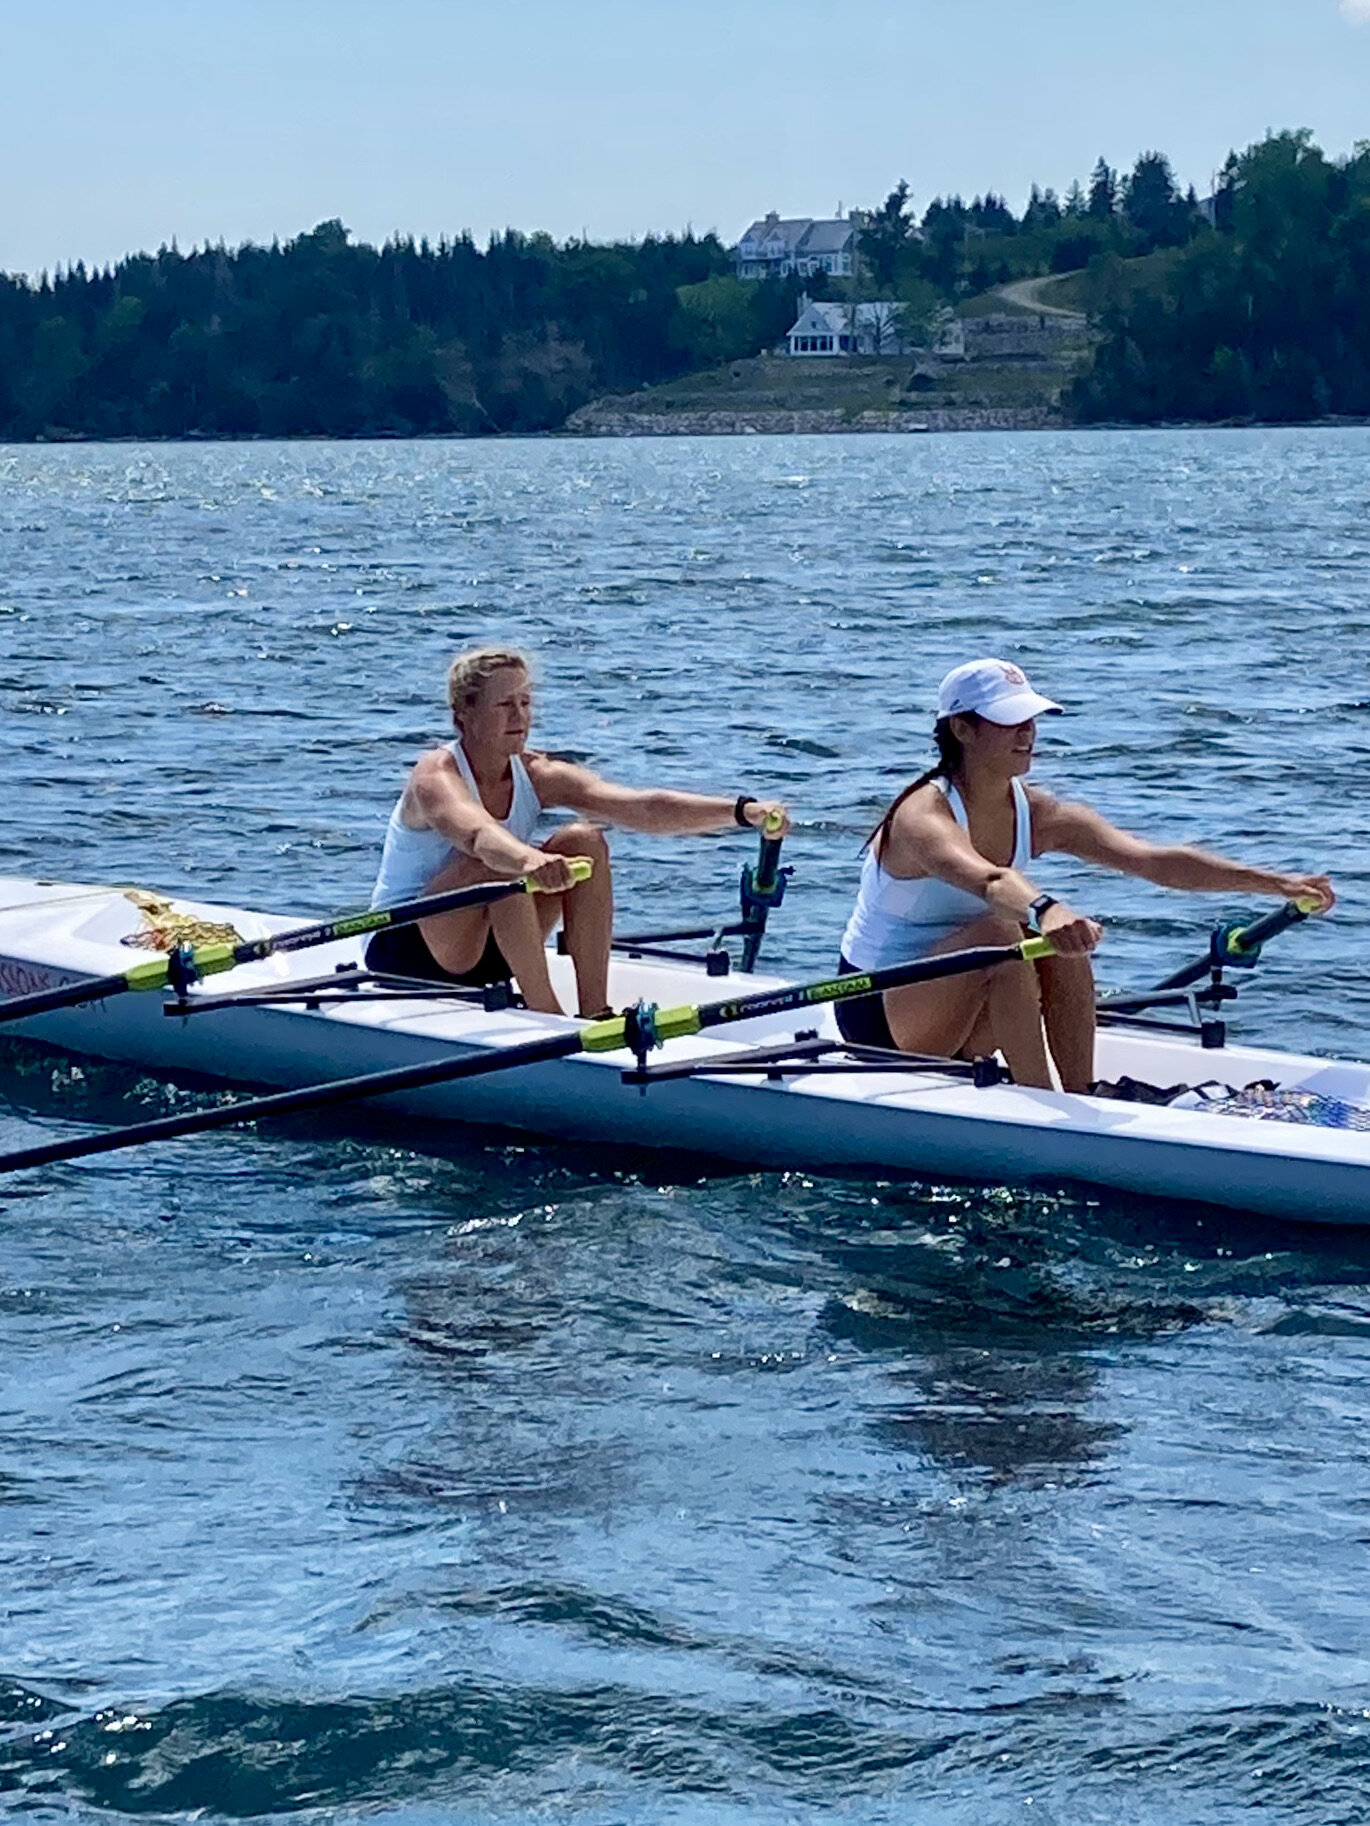  HRC rower and Program Manger Jen Devitt (bow) with her “bubble double” partner in a coastal 2x. Jen was presented with HRC’s 2020 Hammer Award .     